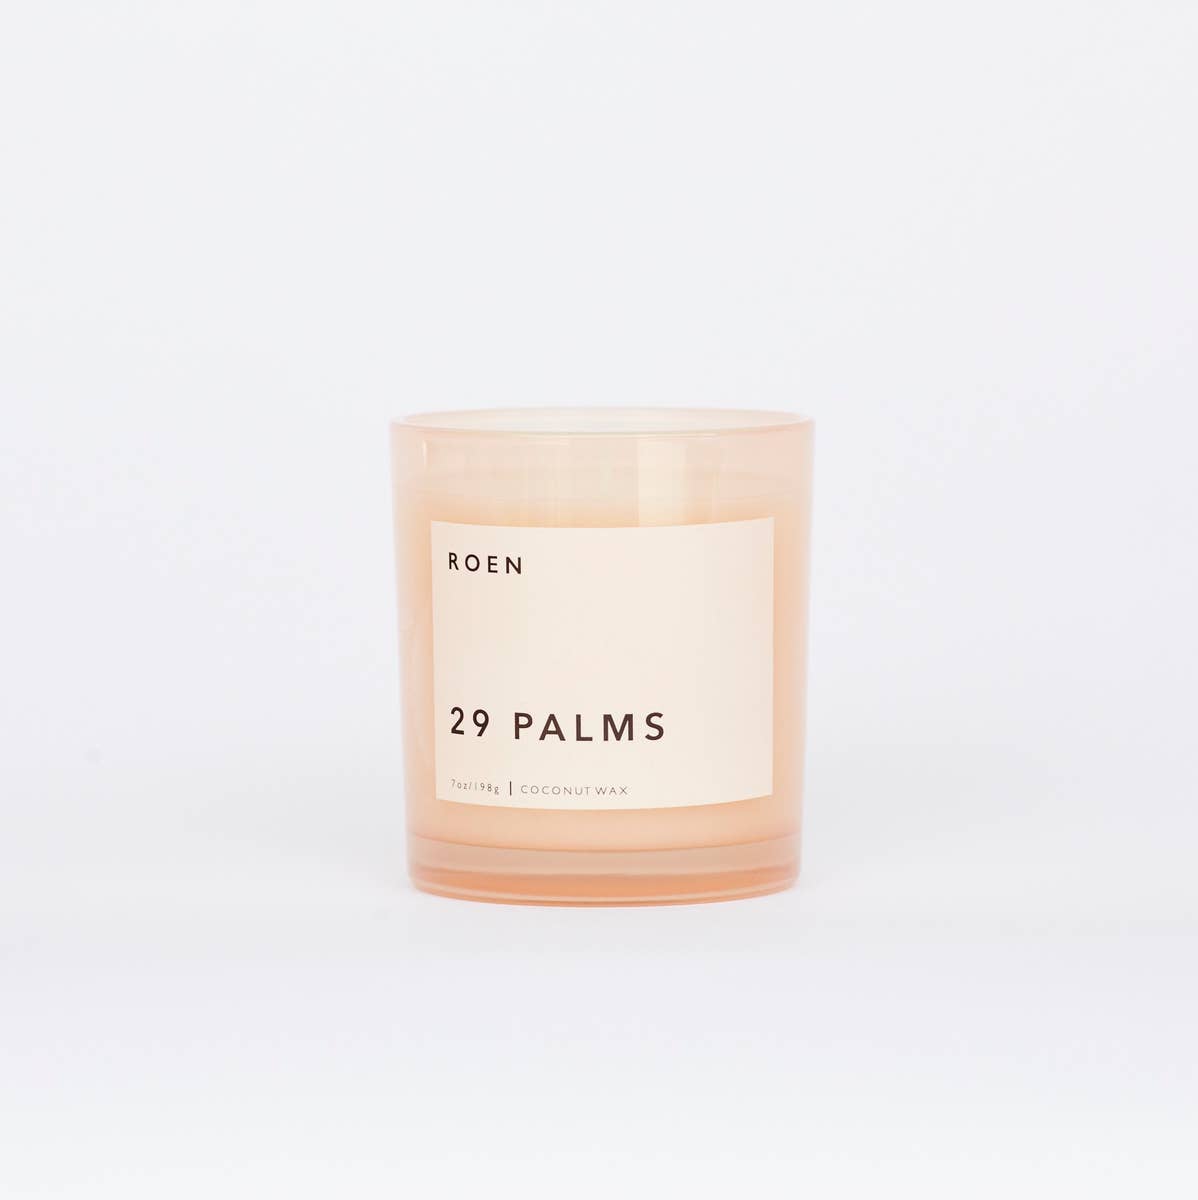 roen / candle - 29 palms